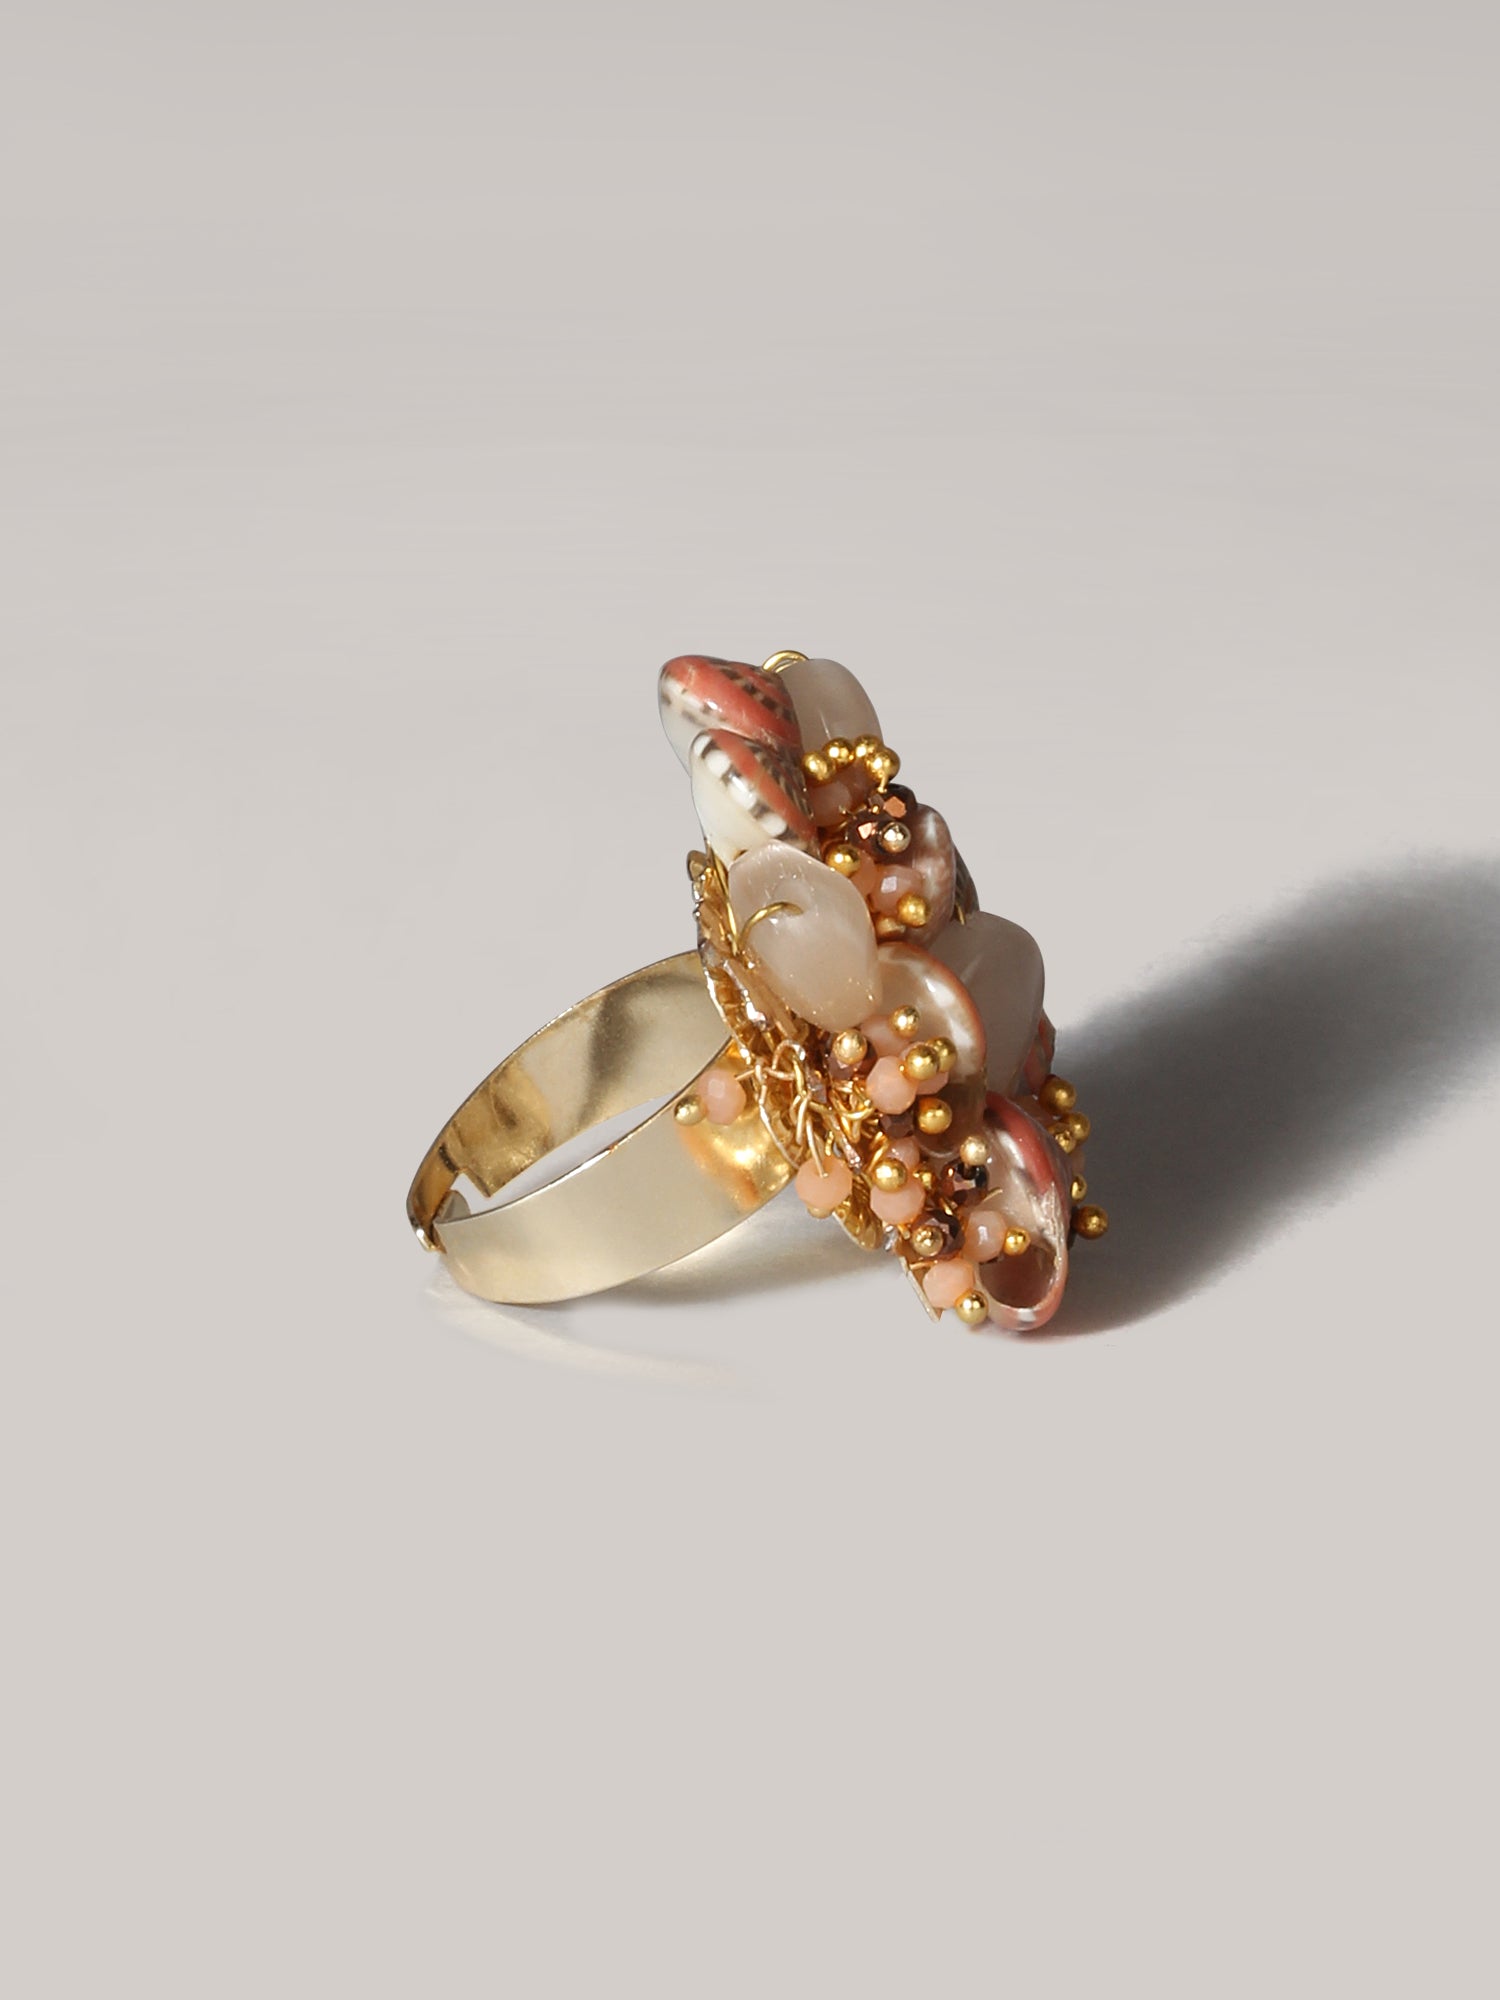 SWEETGUM PINK RING - House of D’oro